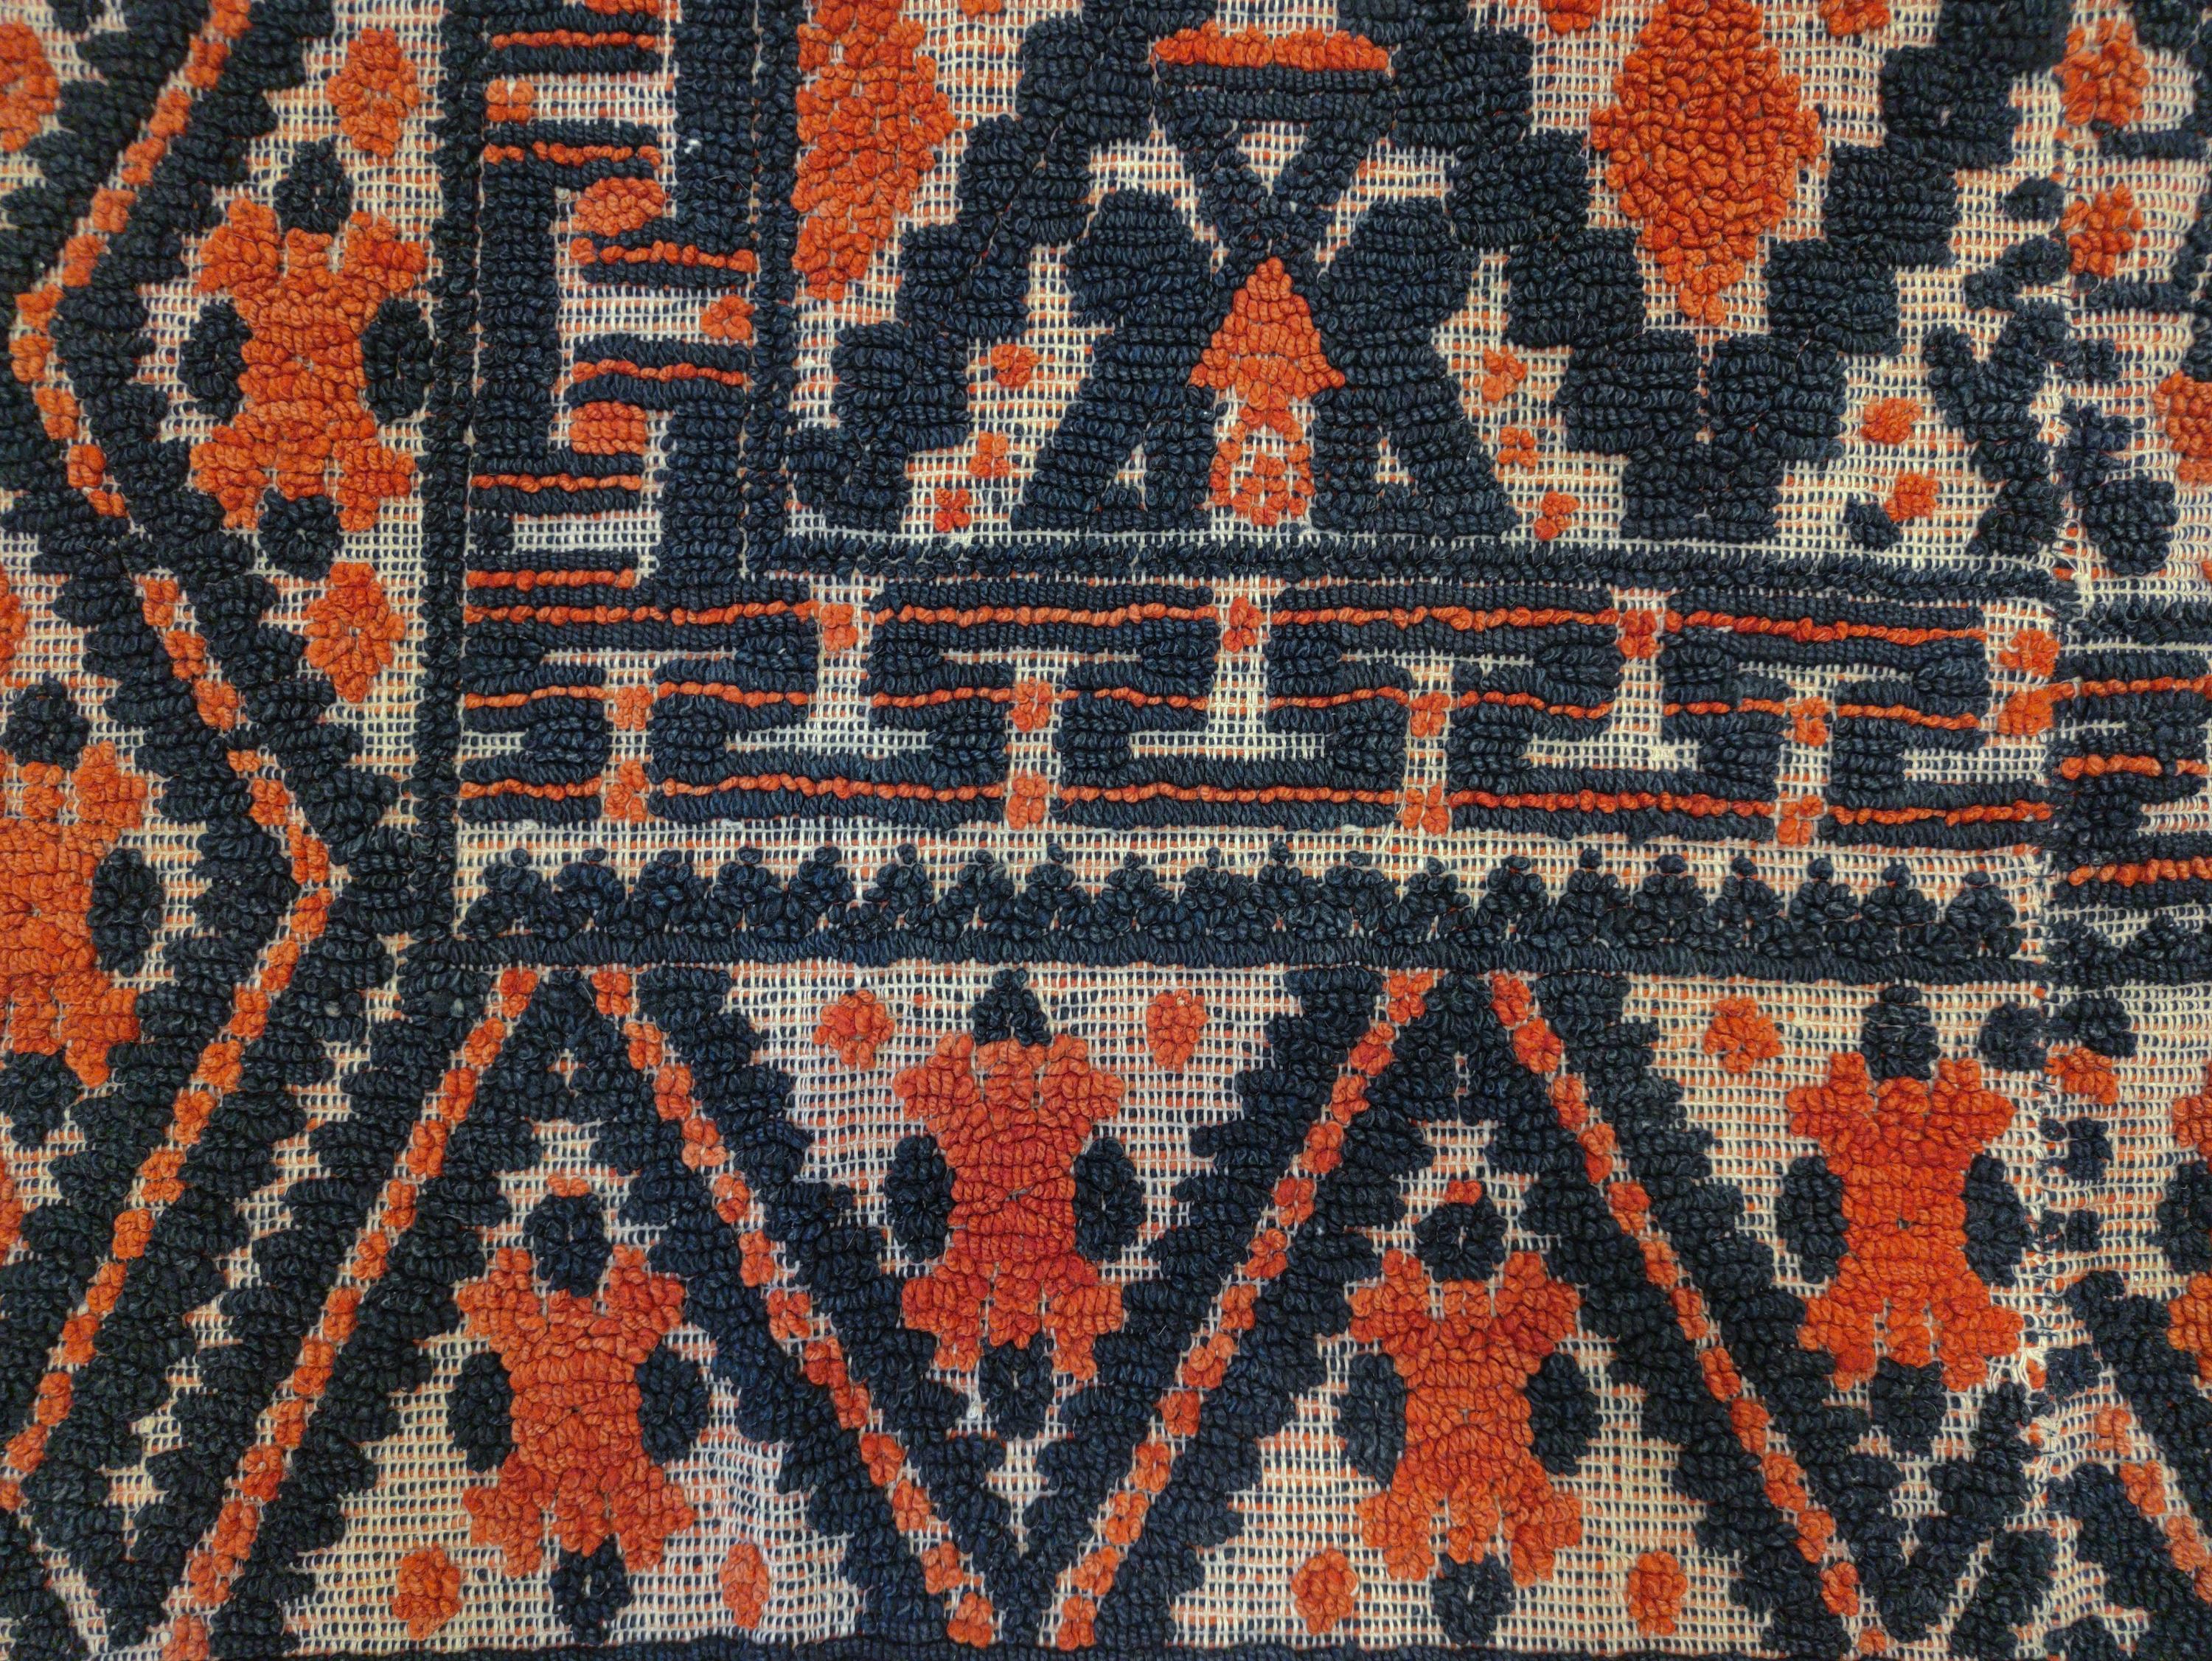 Antique Alpujarra Spanish Textured Rug Signed and Dated 1891 For Sale 3